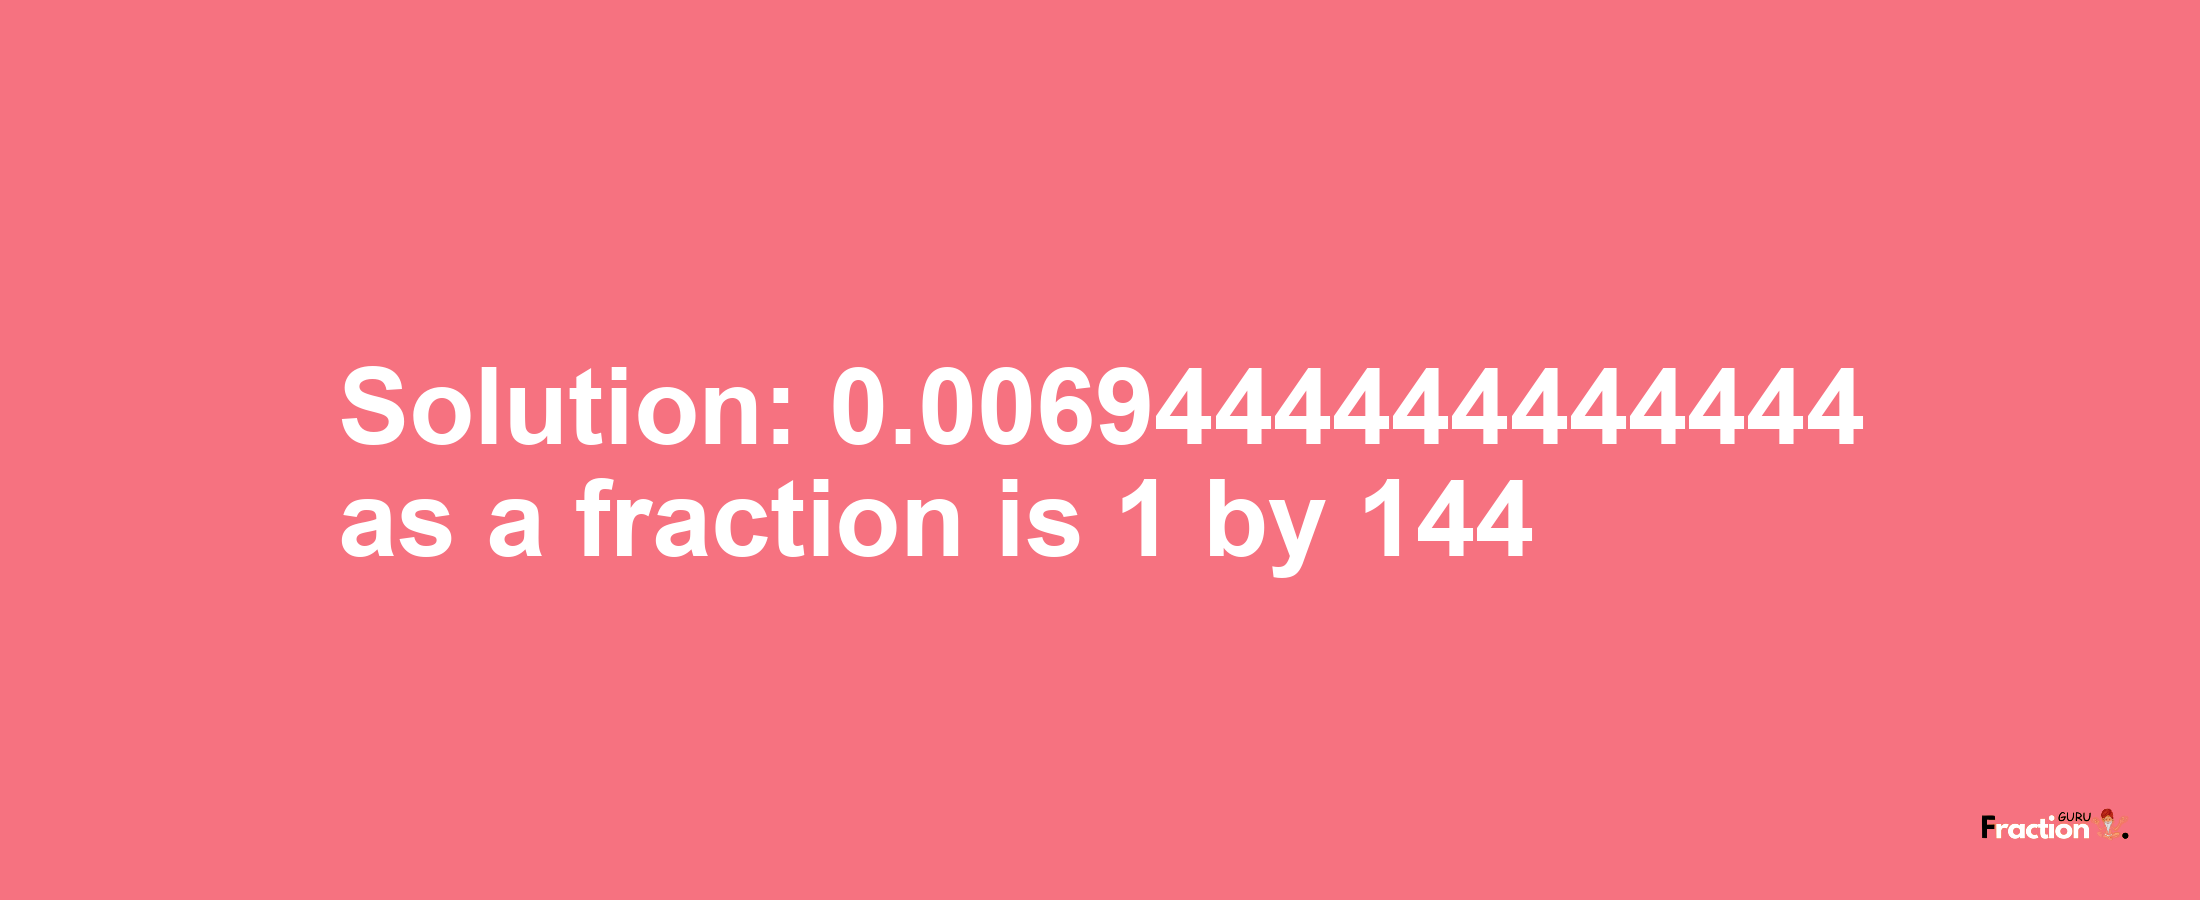 Solution:0.0069444444444444 as a fraction is 1/144